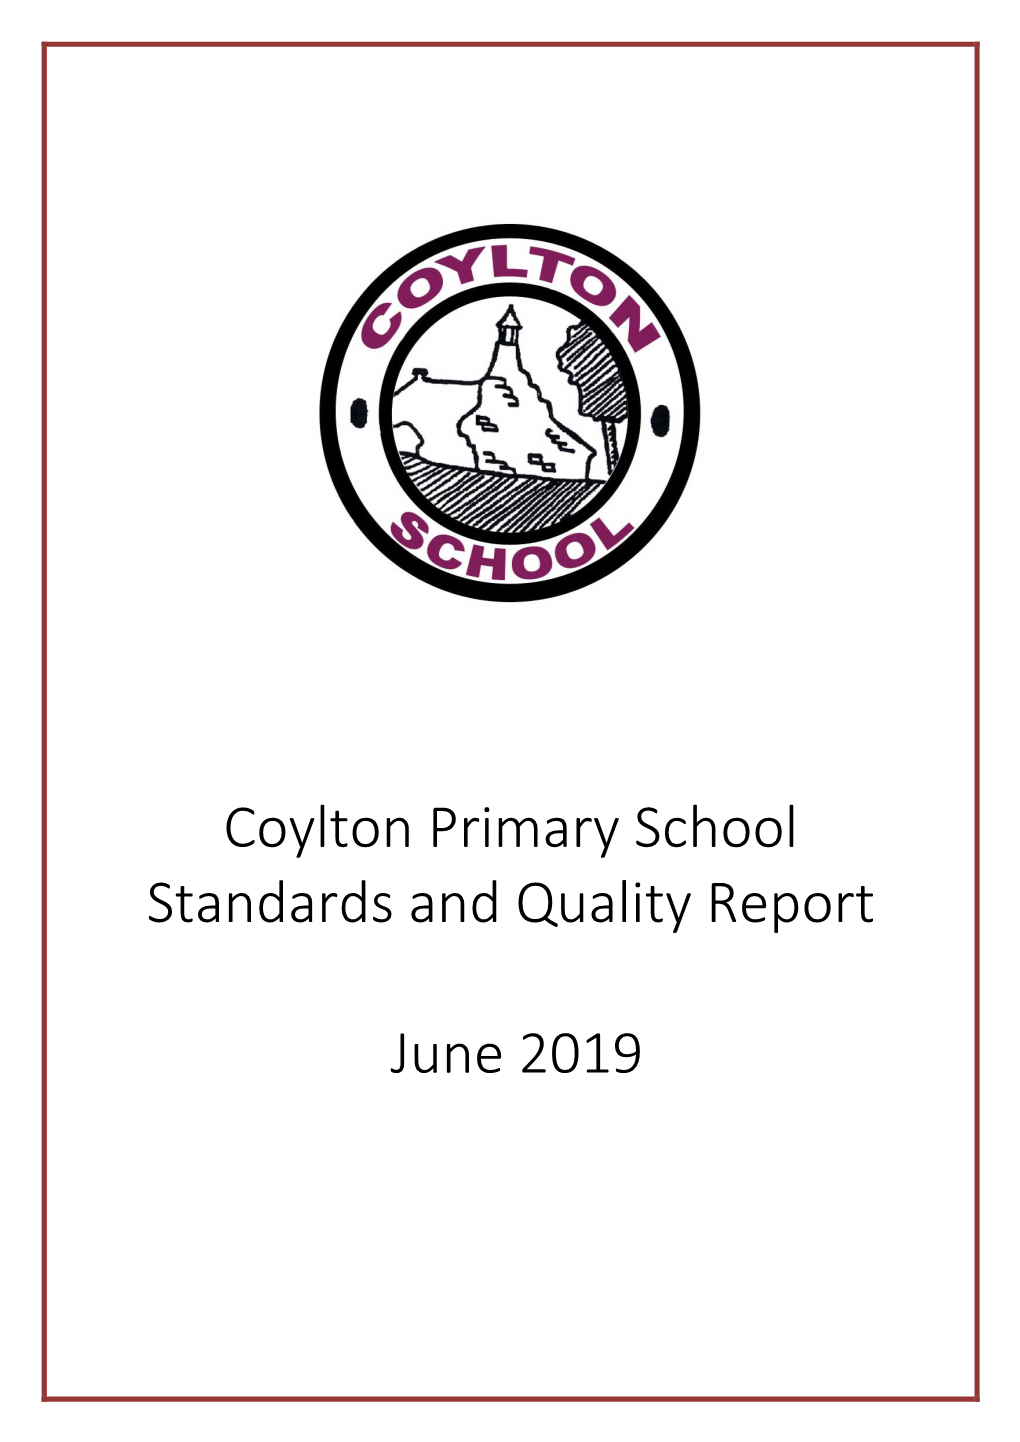 Coylton Primary School Standards and Quality Report June 2019